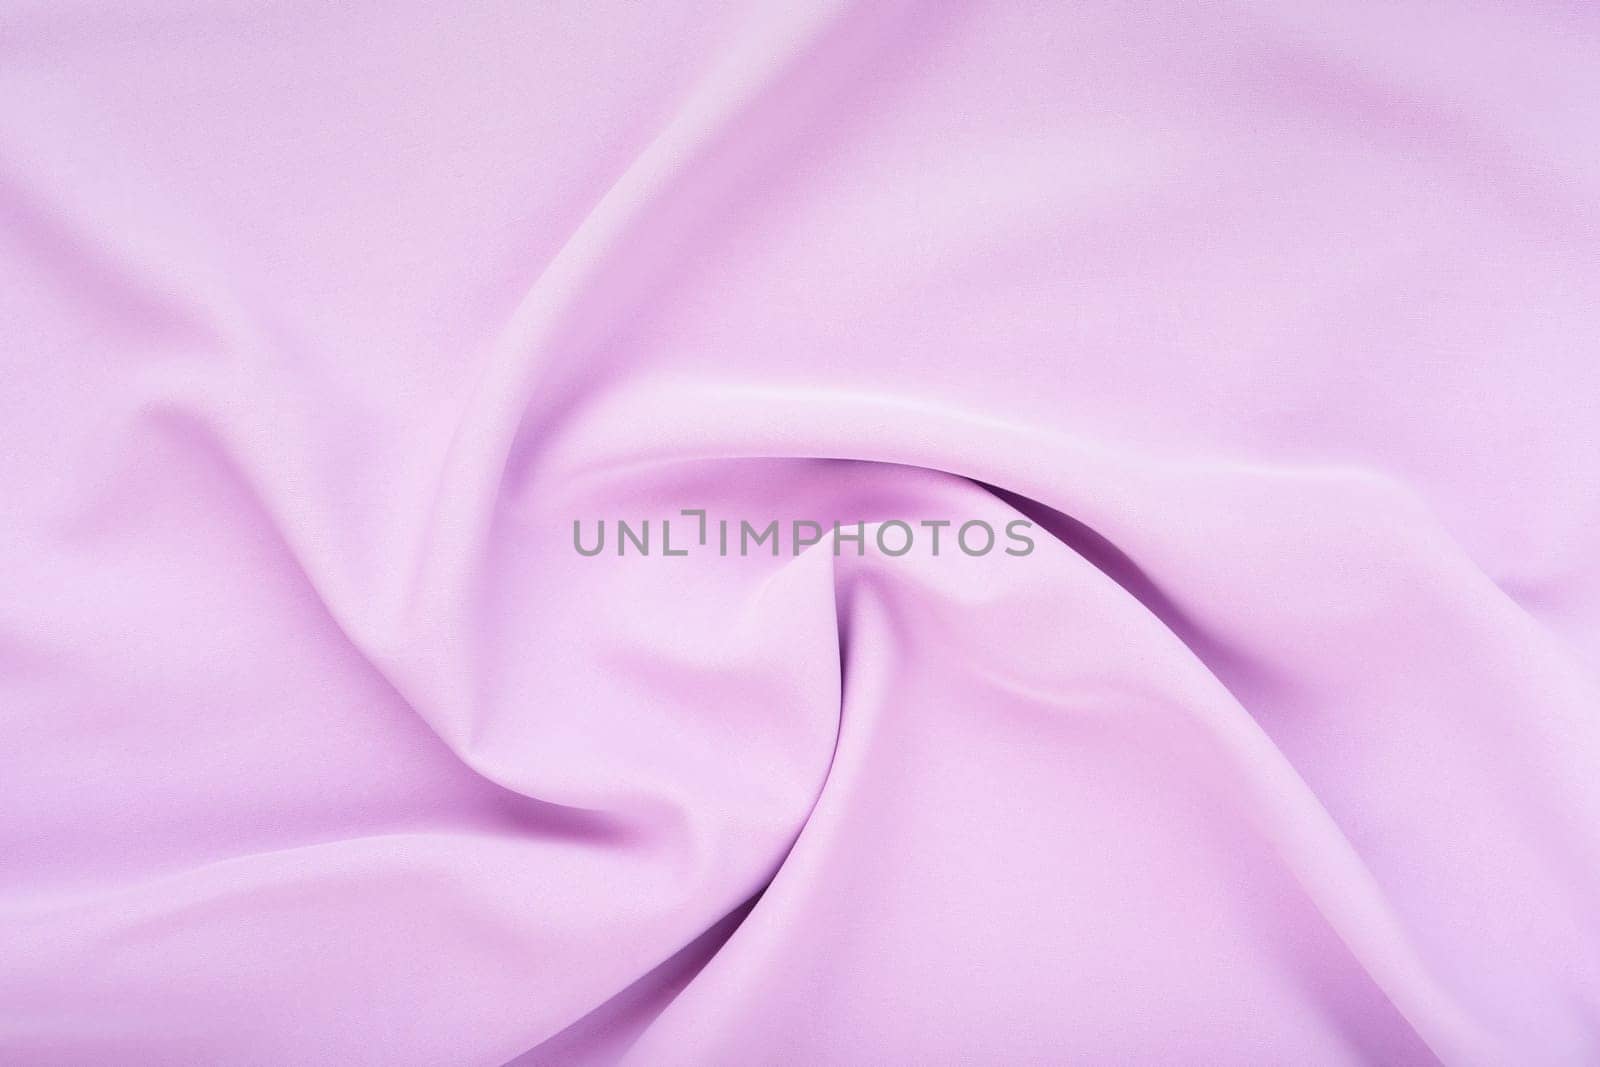 Light Purple fabric cloth texture for background and design art work, beautiful crumpled pattern of silk or linen.